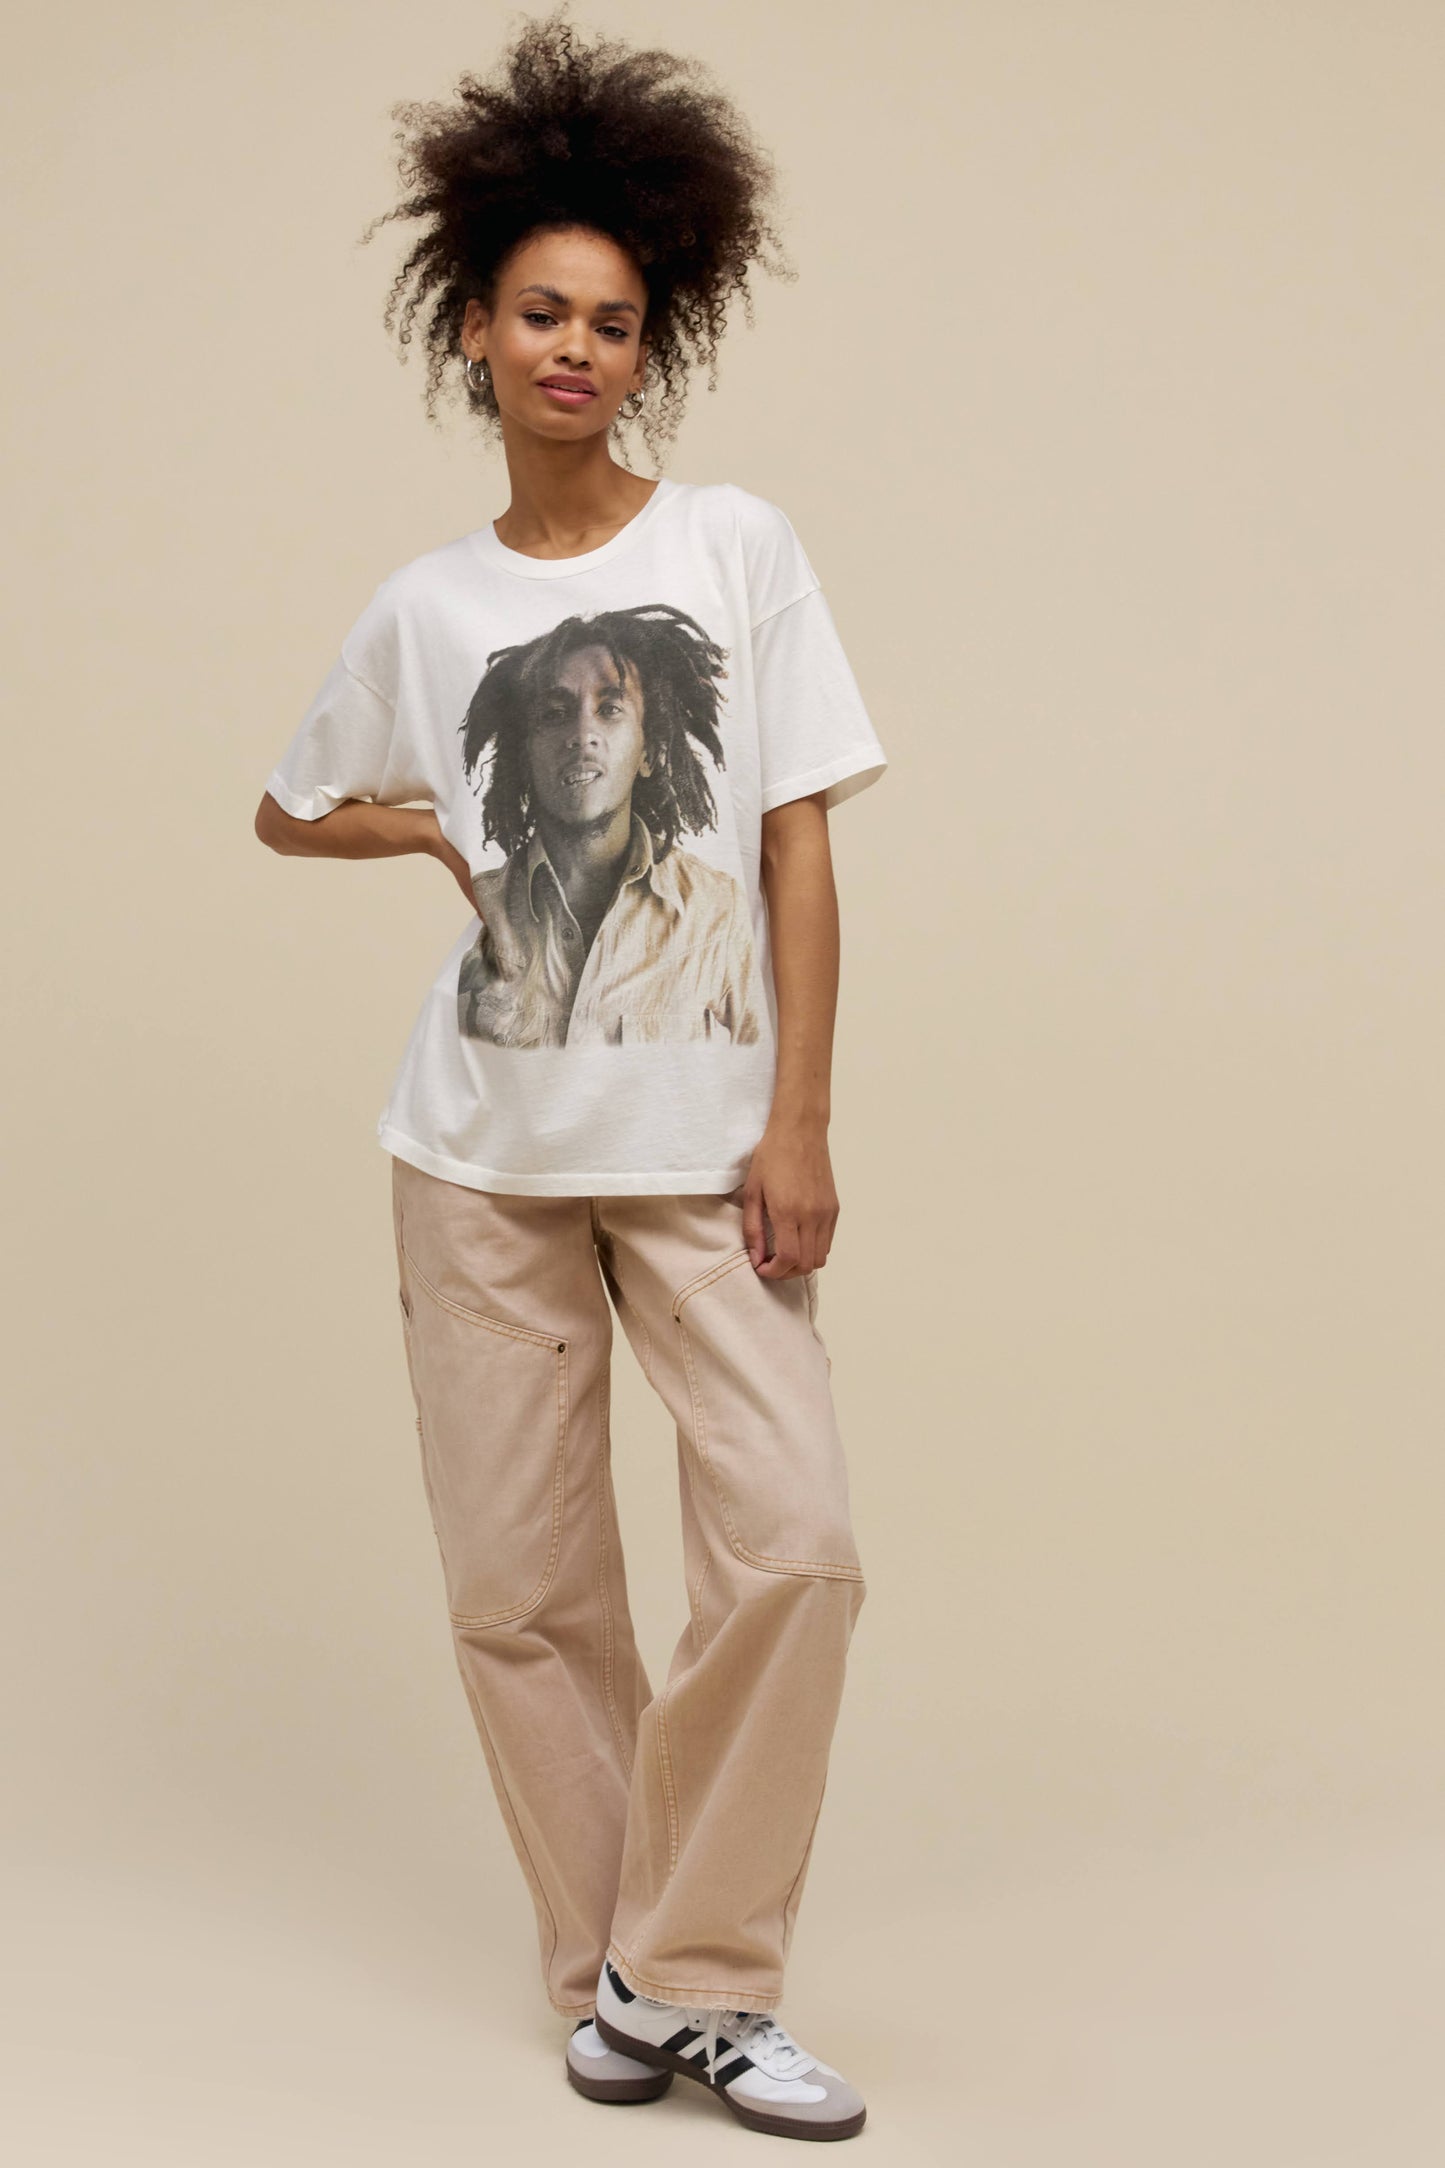 Curly-haired model wearing an oversized Bob Marley graphic tee in vintage white featuring a greyscale portrait of the artist